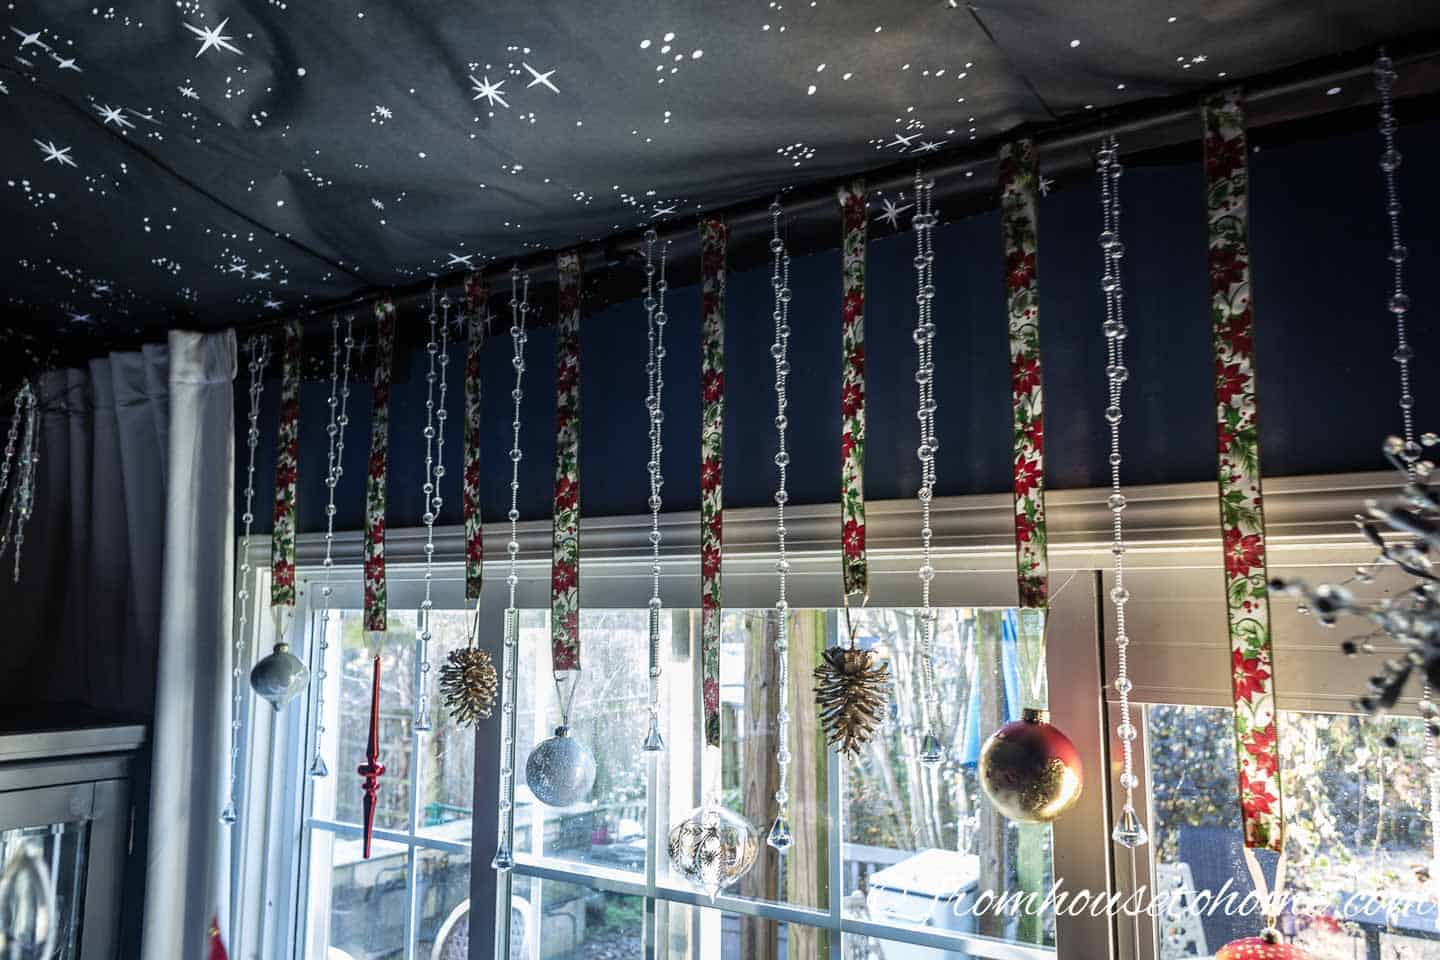 Ornaments hung from a curtain rod for Christmas wall decor